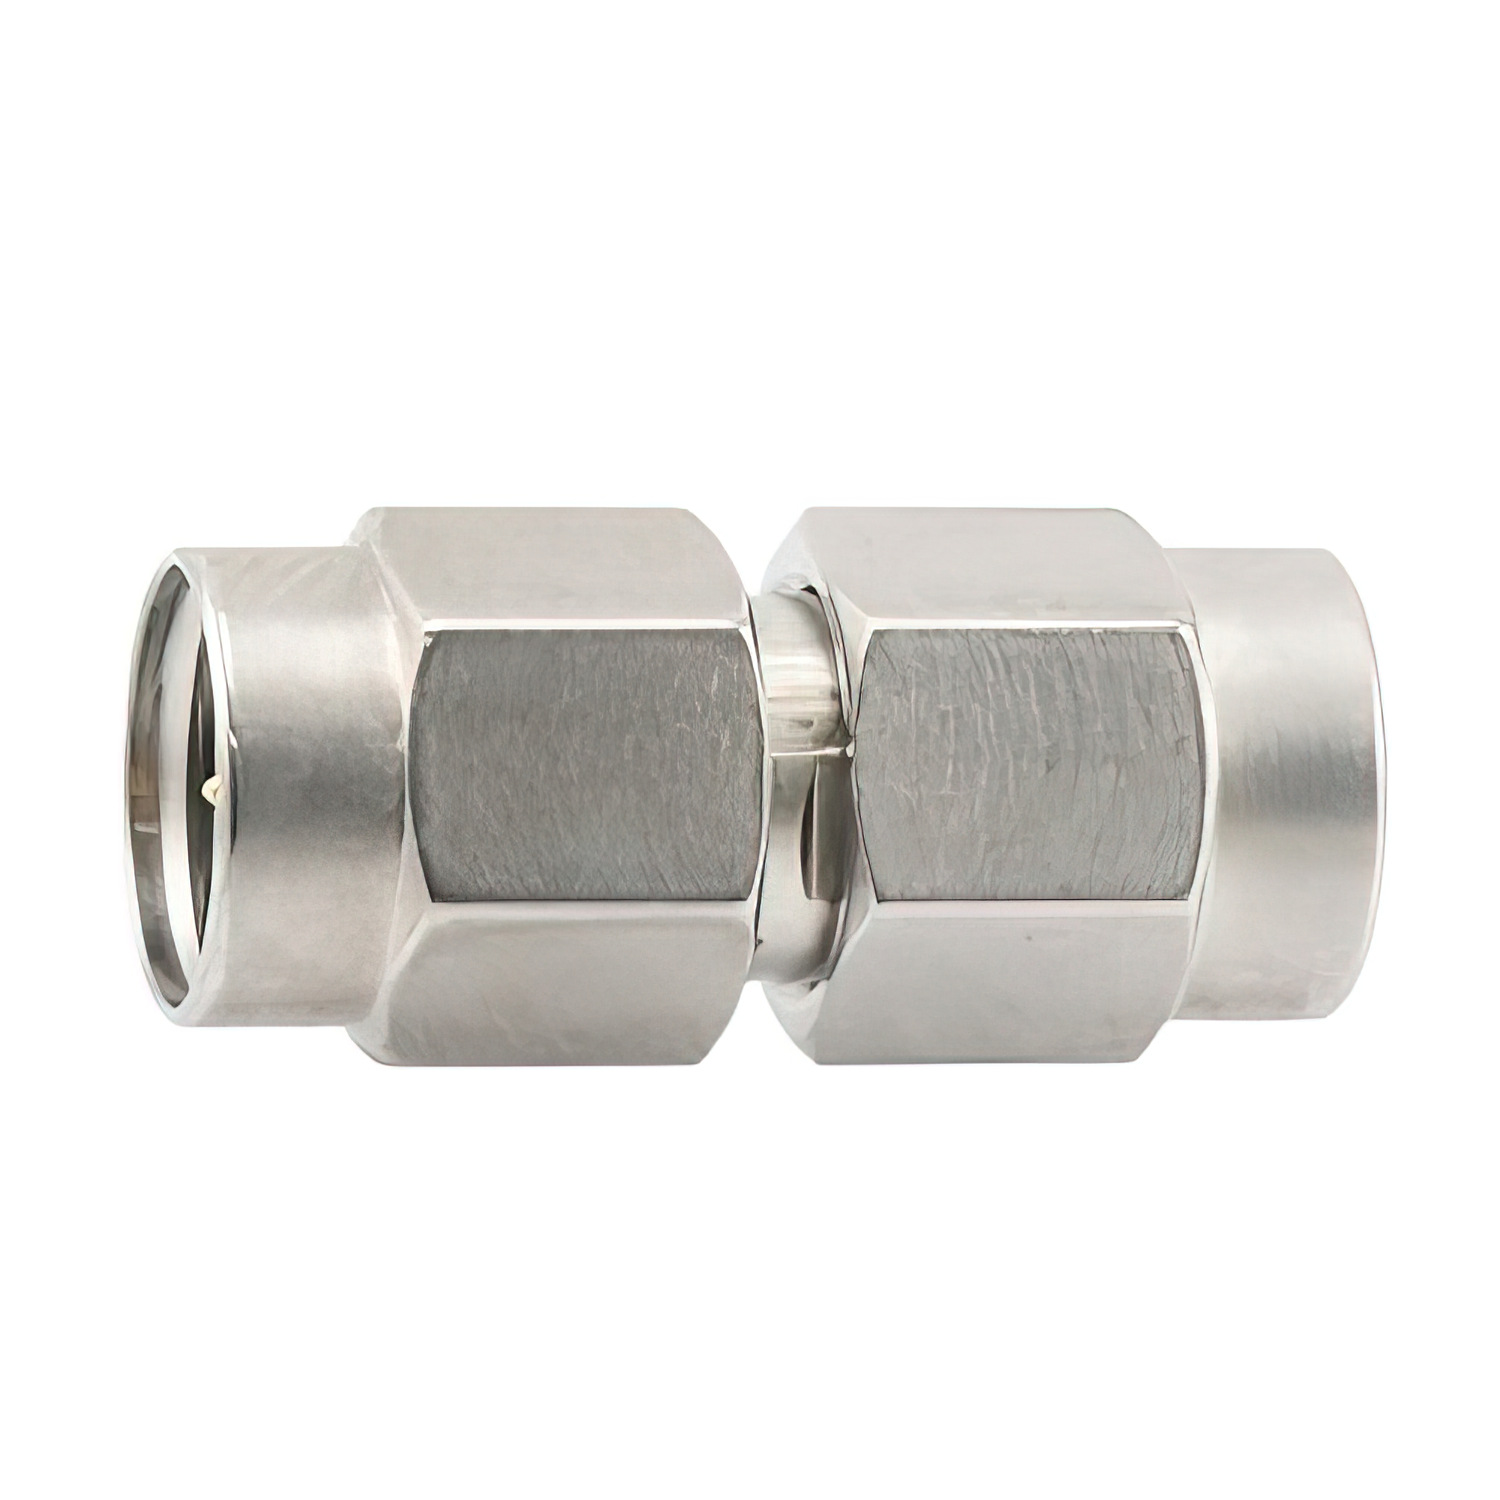 2.4mm male to 1.85mm male adapter3